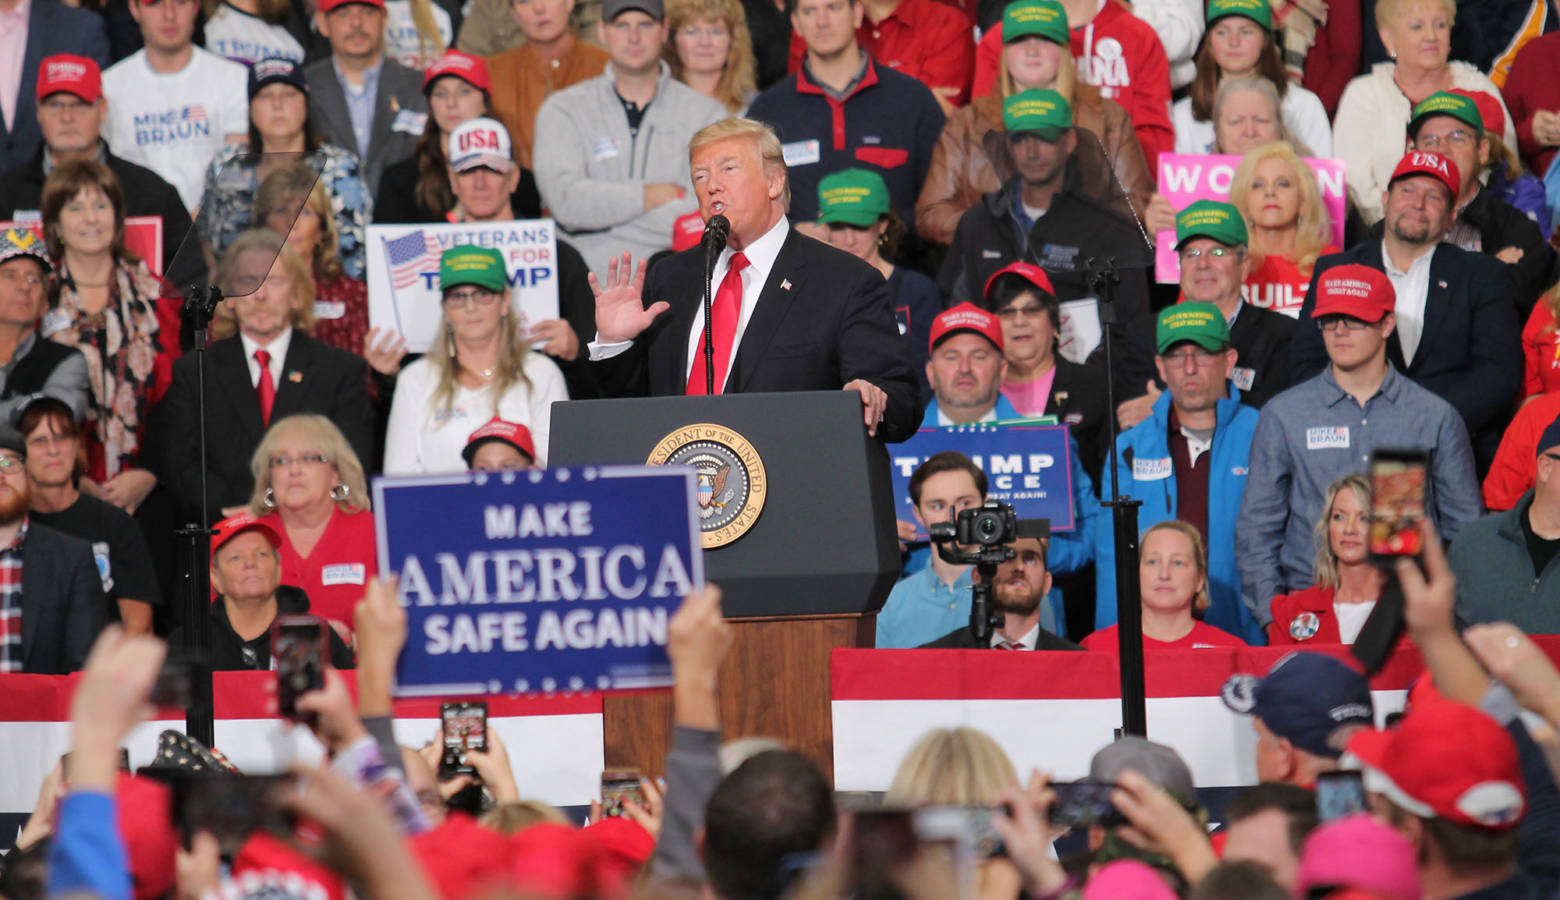 More Hoosiers approve of President Trump’s job performance than disapprove, according to the latest edition of Ball State’s Hoosier Survey. (FILE PHOTO: Lauren Chapman/IPB News)